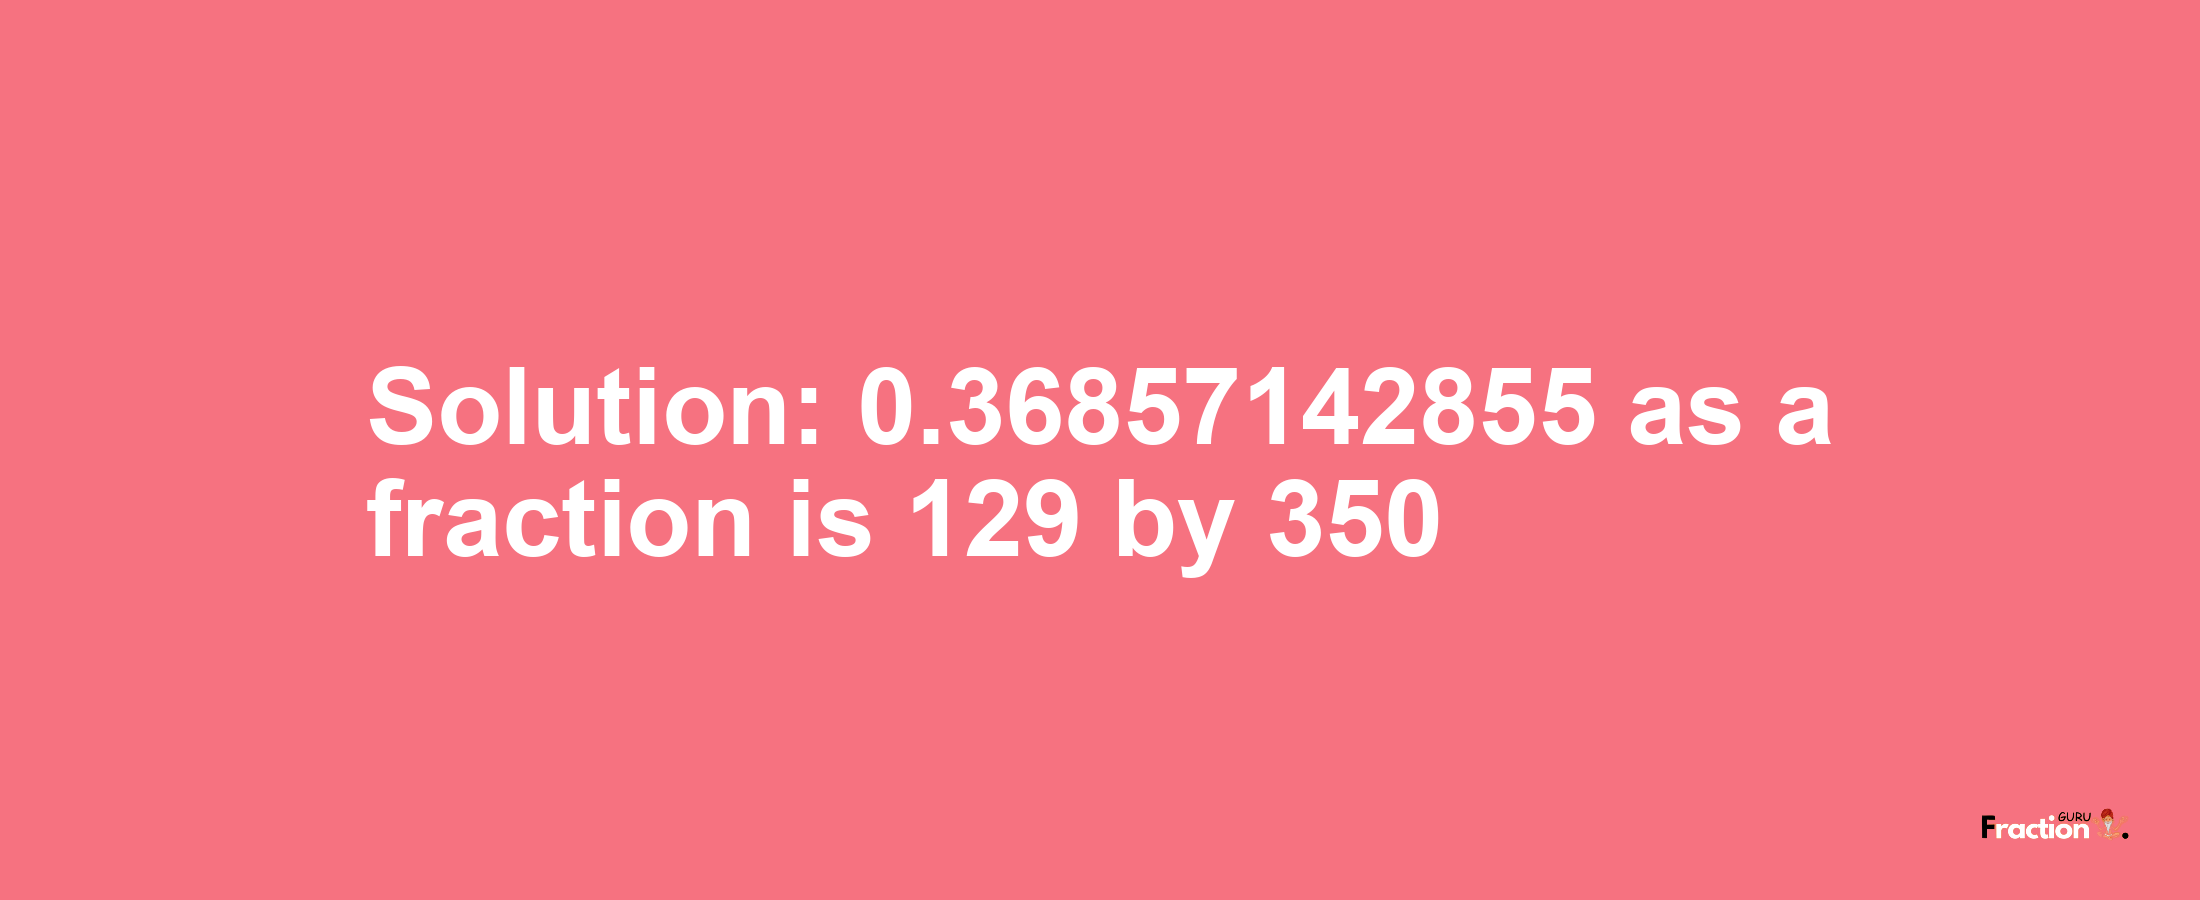 Solution:0.36857142855 as a fraction is 129/350